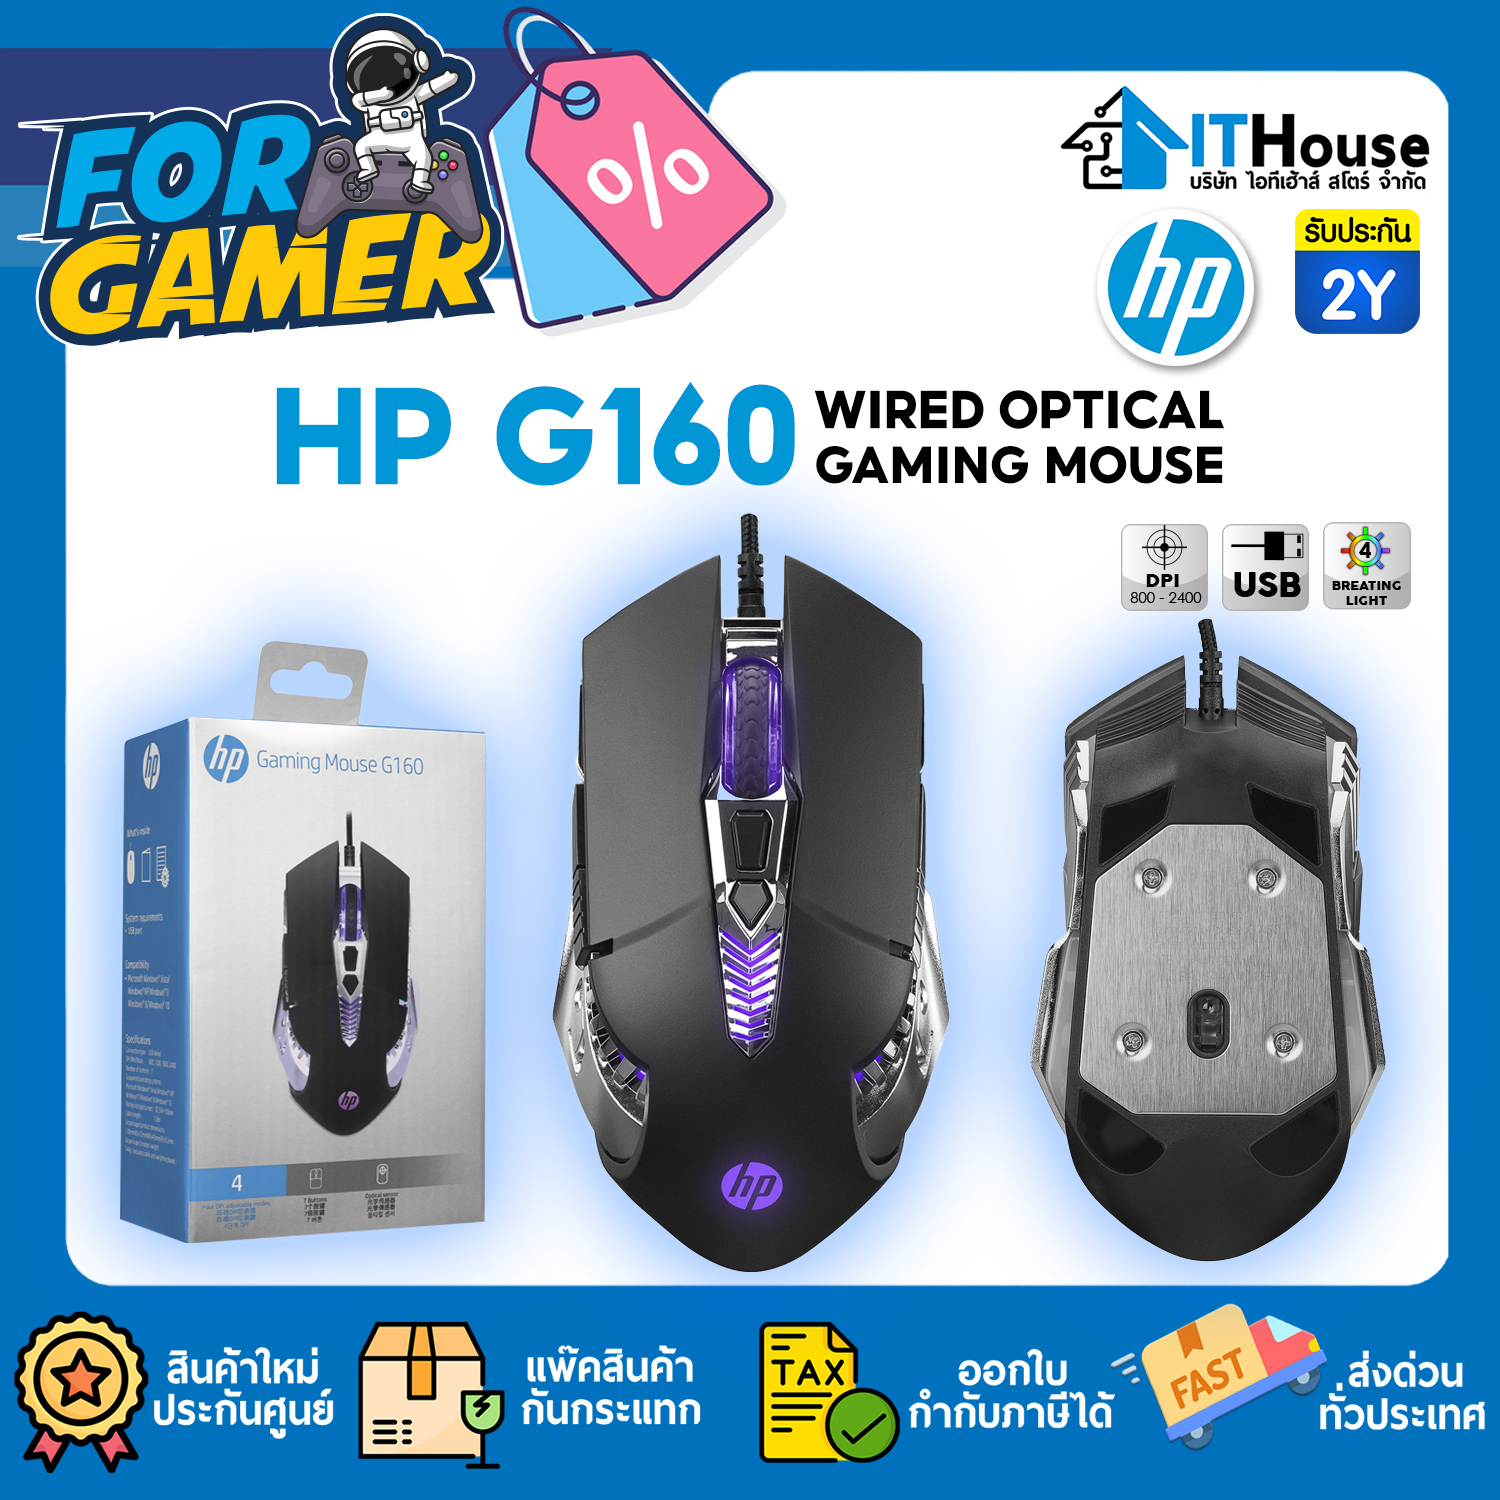 HP G160 WIRED GAMING MOUSE (ฺBLACK)